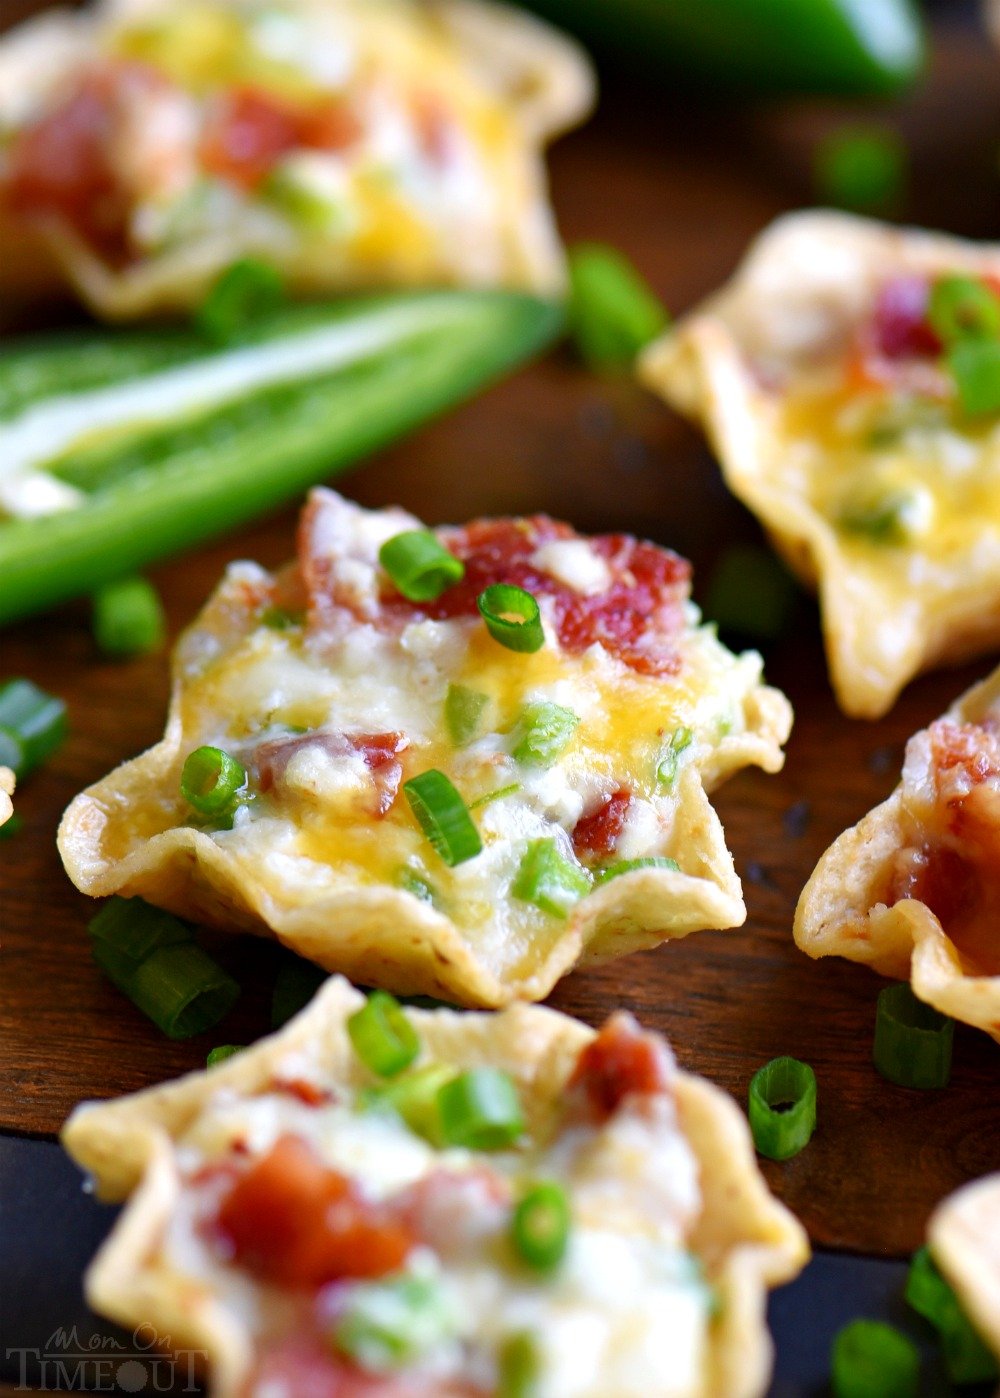 Easy Jalapeño Popper Bites are sure to be the hit of your party! This extra delicious appetizer is creamy, cheesy, spicy, bite-sized and did I mention loaded with bacon?? Seriously awesome!